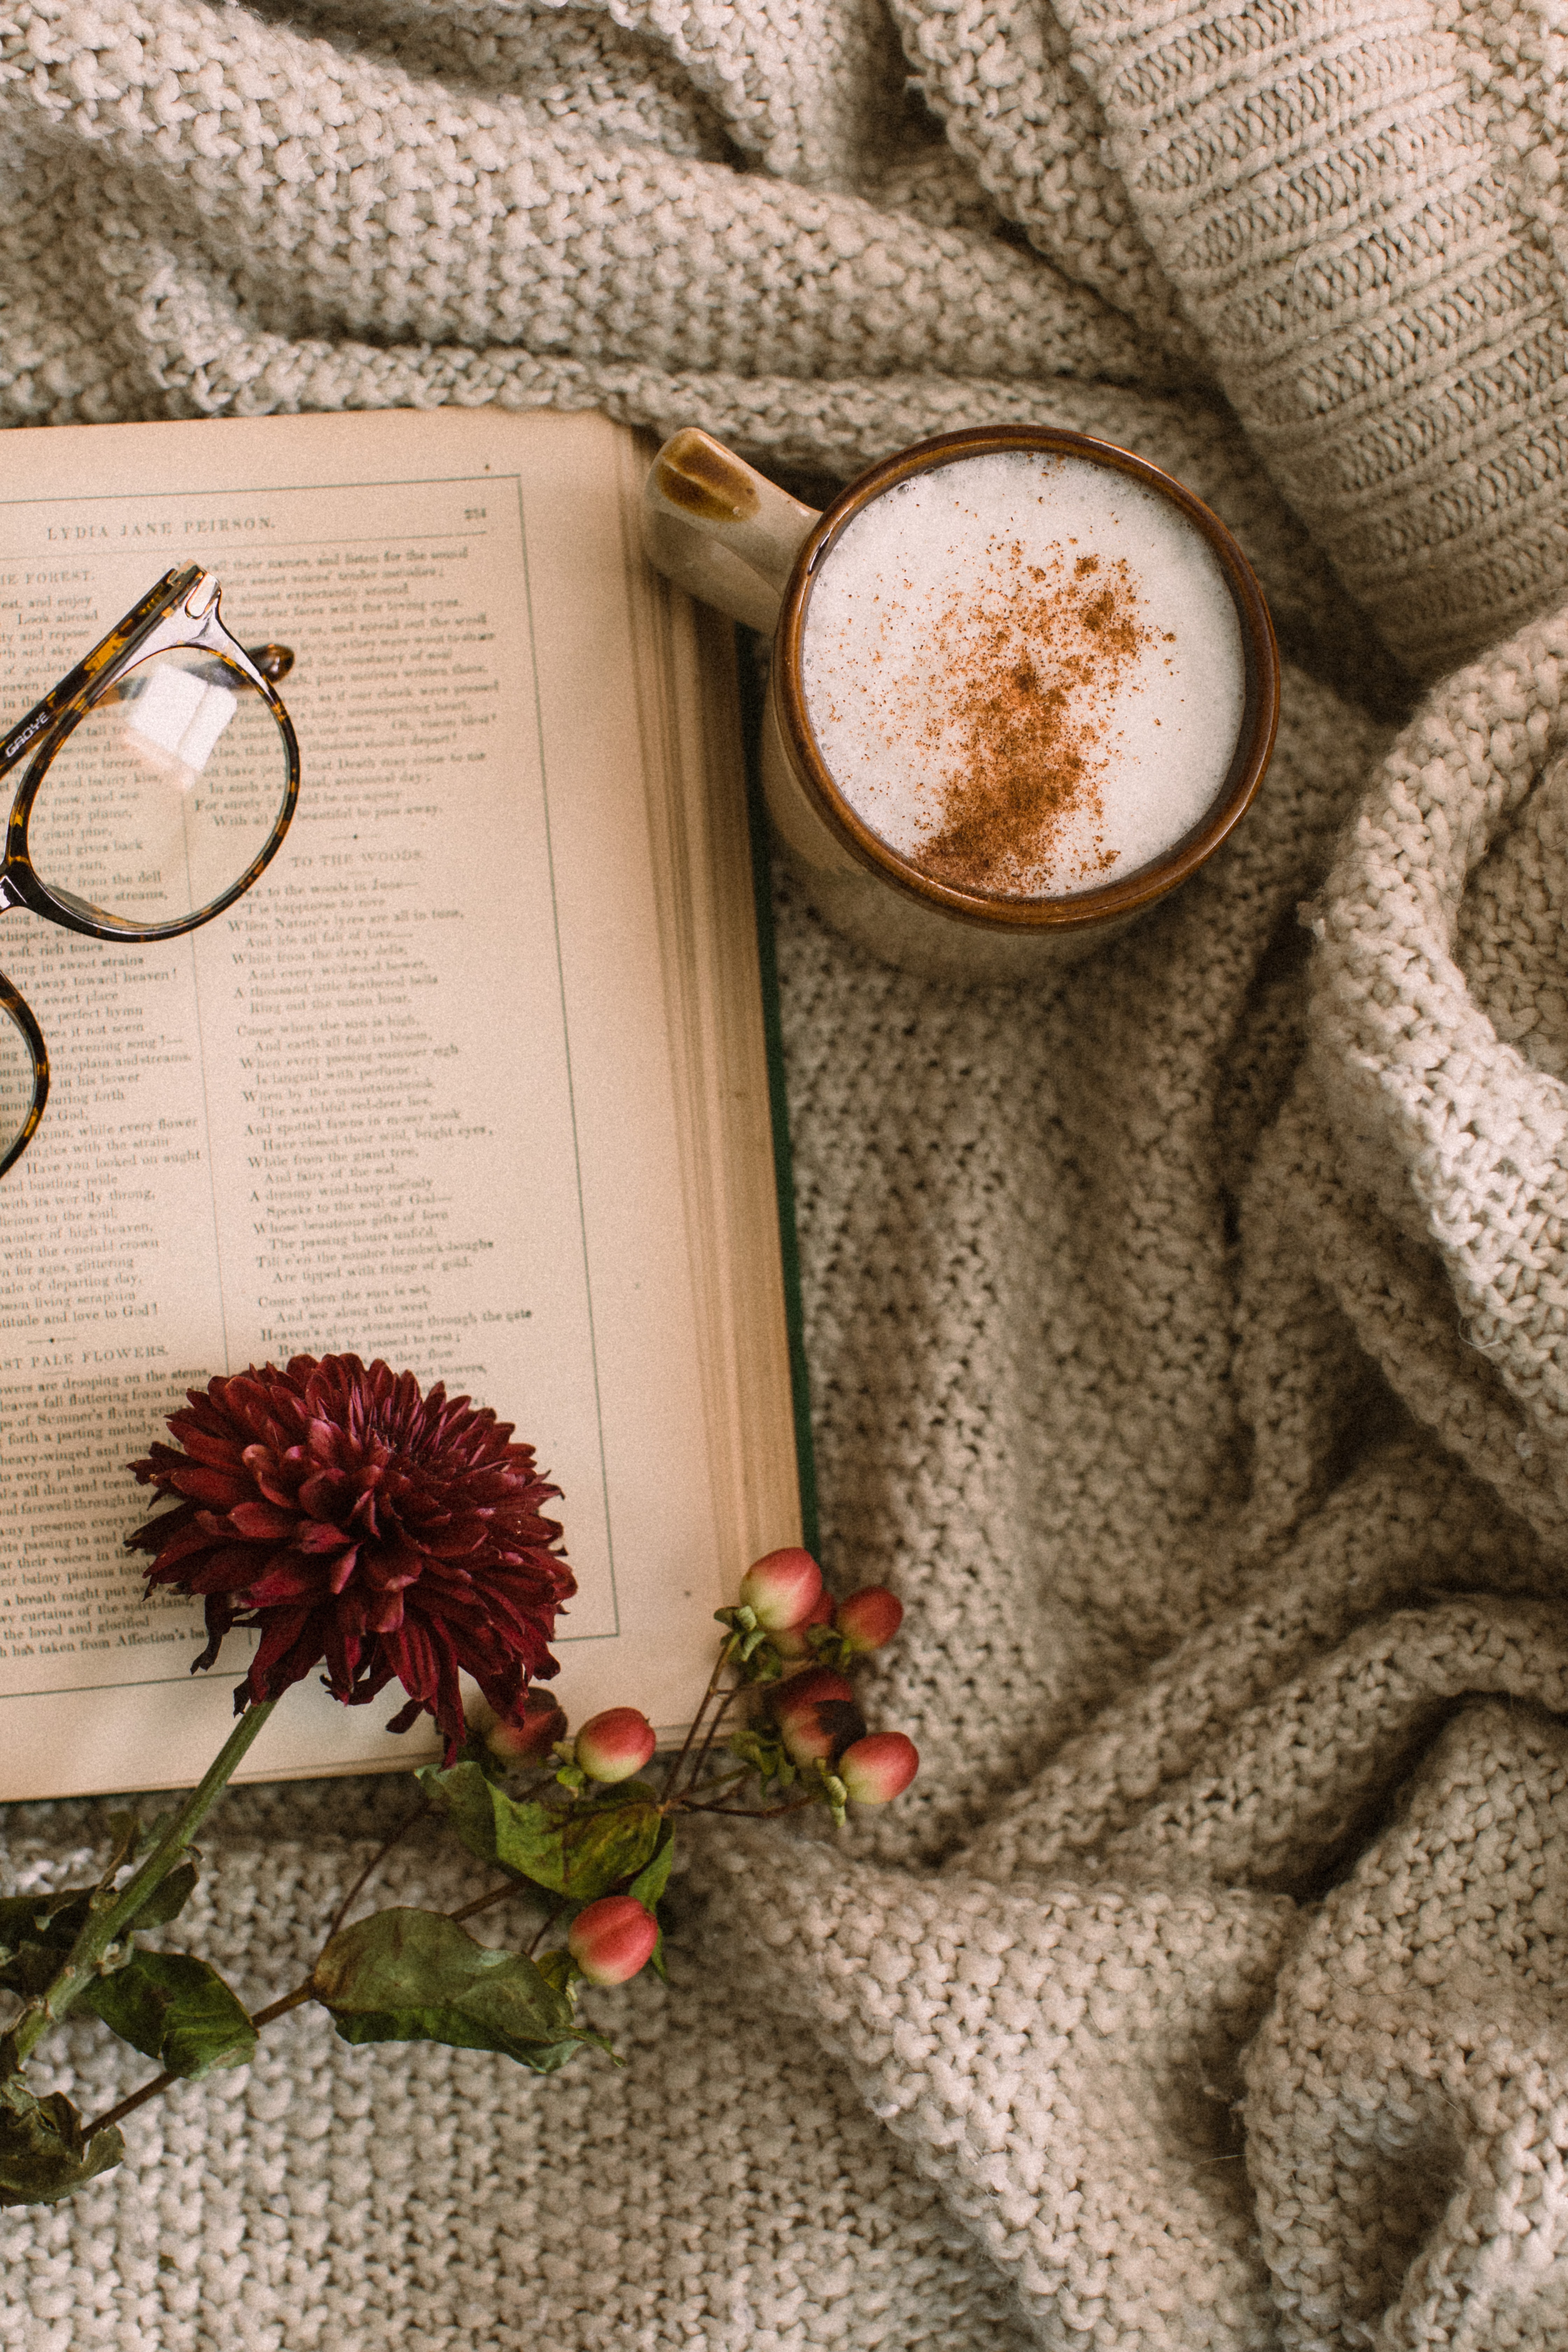 cup, spectacles, flowers, food, coffee, book, cappuccino, glasses, mug Full HD